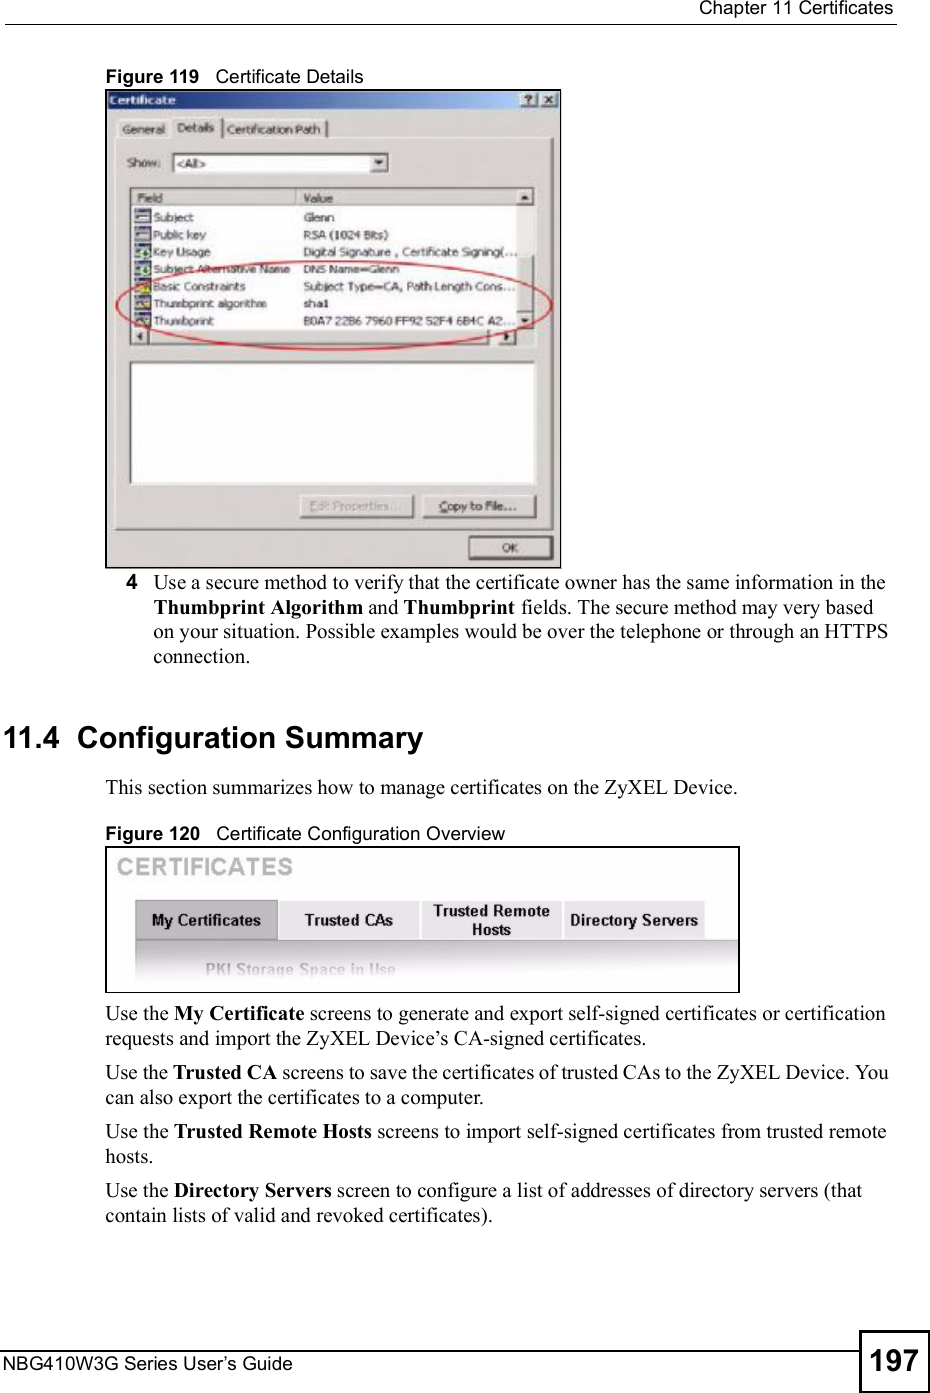  Chapter 11CertificatesNBG410W3G Series User s Guide 197Figure 119   Certificate Details 4Use a secure method to verify that the certificate owner has the same information in the Thumbprint Algorithm and Thumbprint fields. The secure method may very based on your situation. Possible examples would be over the telephone or through an HTTPS connection. 11.4  Configuration SummaryThis section summarizes how to manage certificates on the ZyXEL Device.Figure 120   Certificate Configuration OverviewUse the My Certificate screens to generate and export self-signed certificates or certification requests and import the ZyXEL Device!s CA-signed certificates.Use the Trusted CA screens to save the certificates of trusted CAs to the ZyXEL Device. You can also export the certificates to a computer.Use the Trusted Remote Hosts screens to import self-signed certificates from trusted remote hosts.Use the Directory Servers screen to configure a list of addresses of directory servers (that contain lists of valid and revoked certificates).